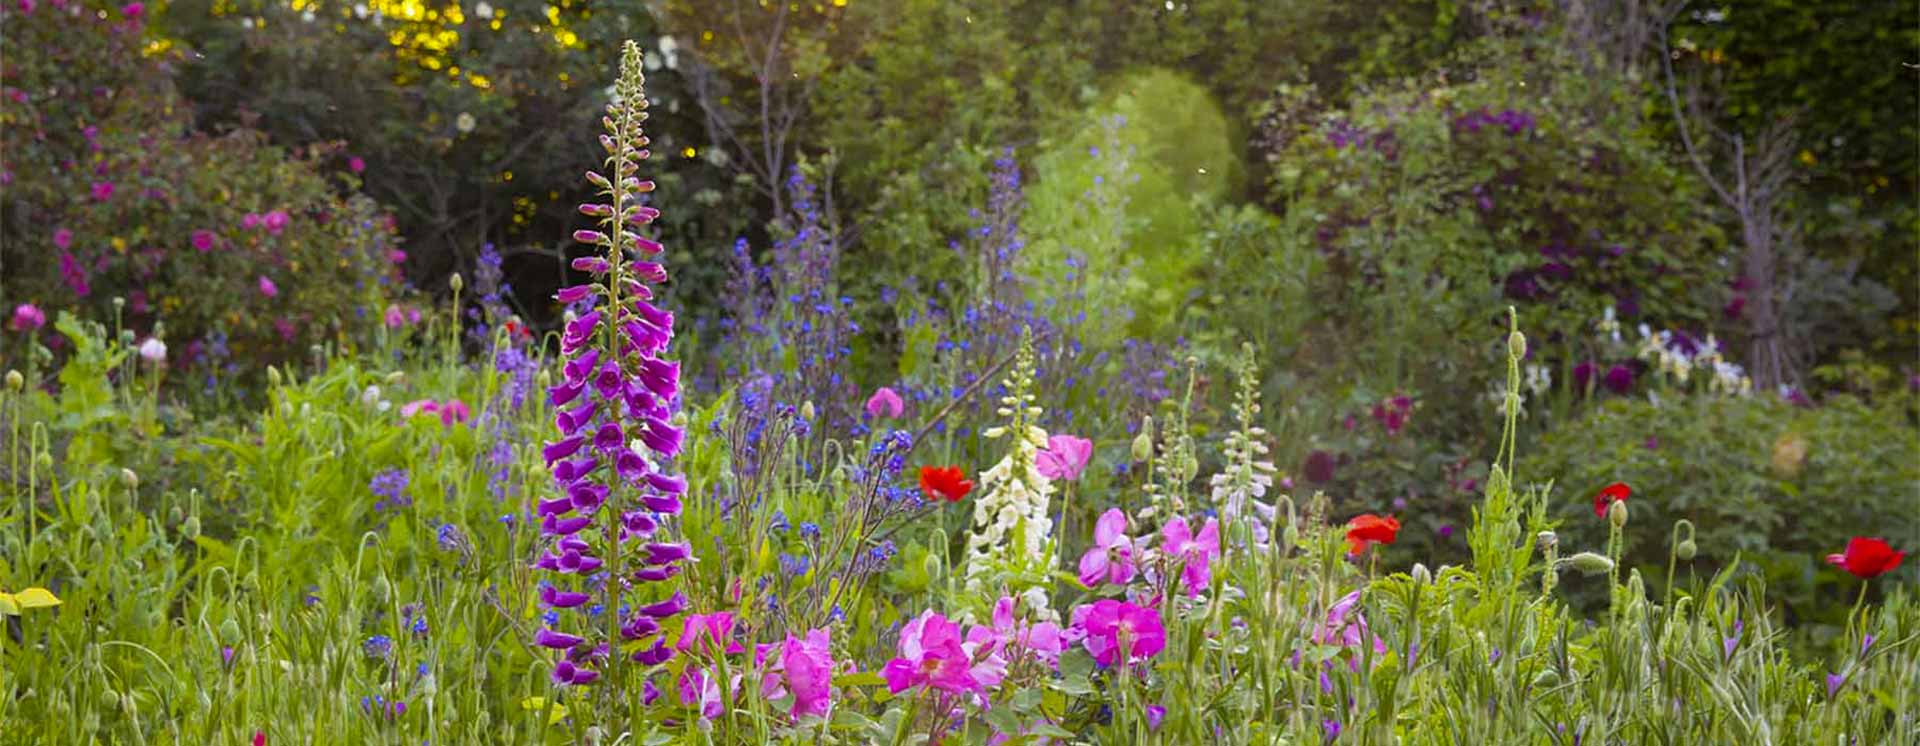 Colourful meadow flowers with purple, red and blue flowers